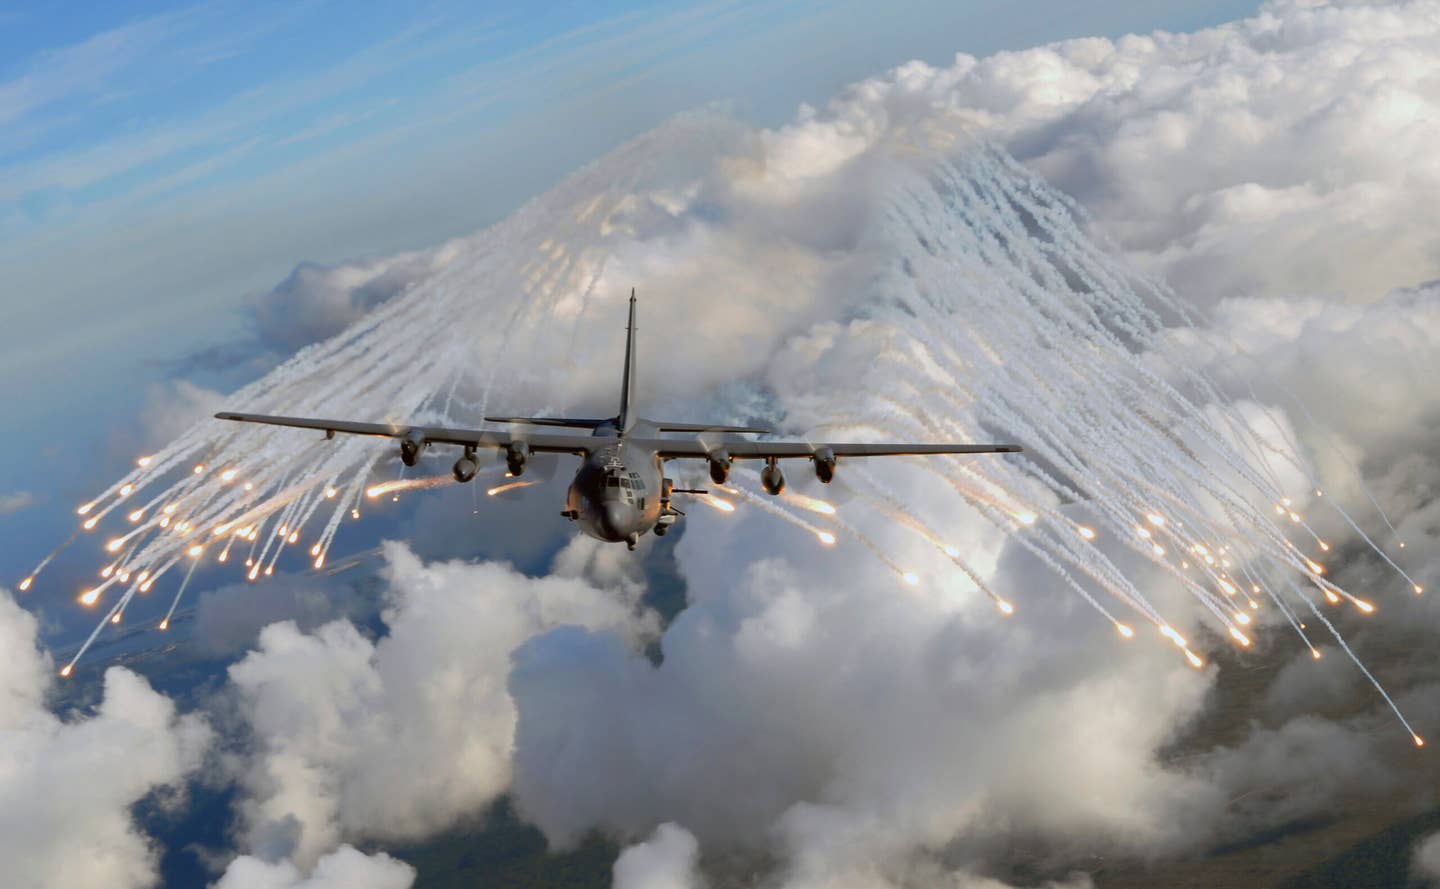 The AC-130 has long provided support for troops on the ground. (Getty Images)